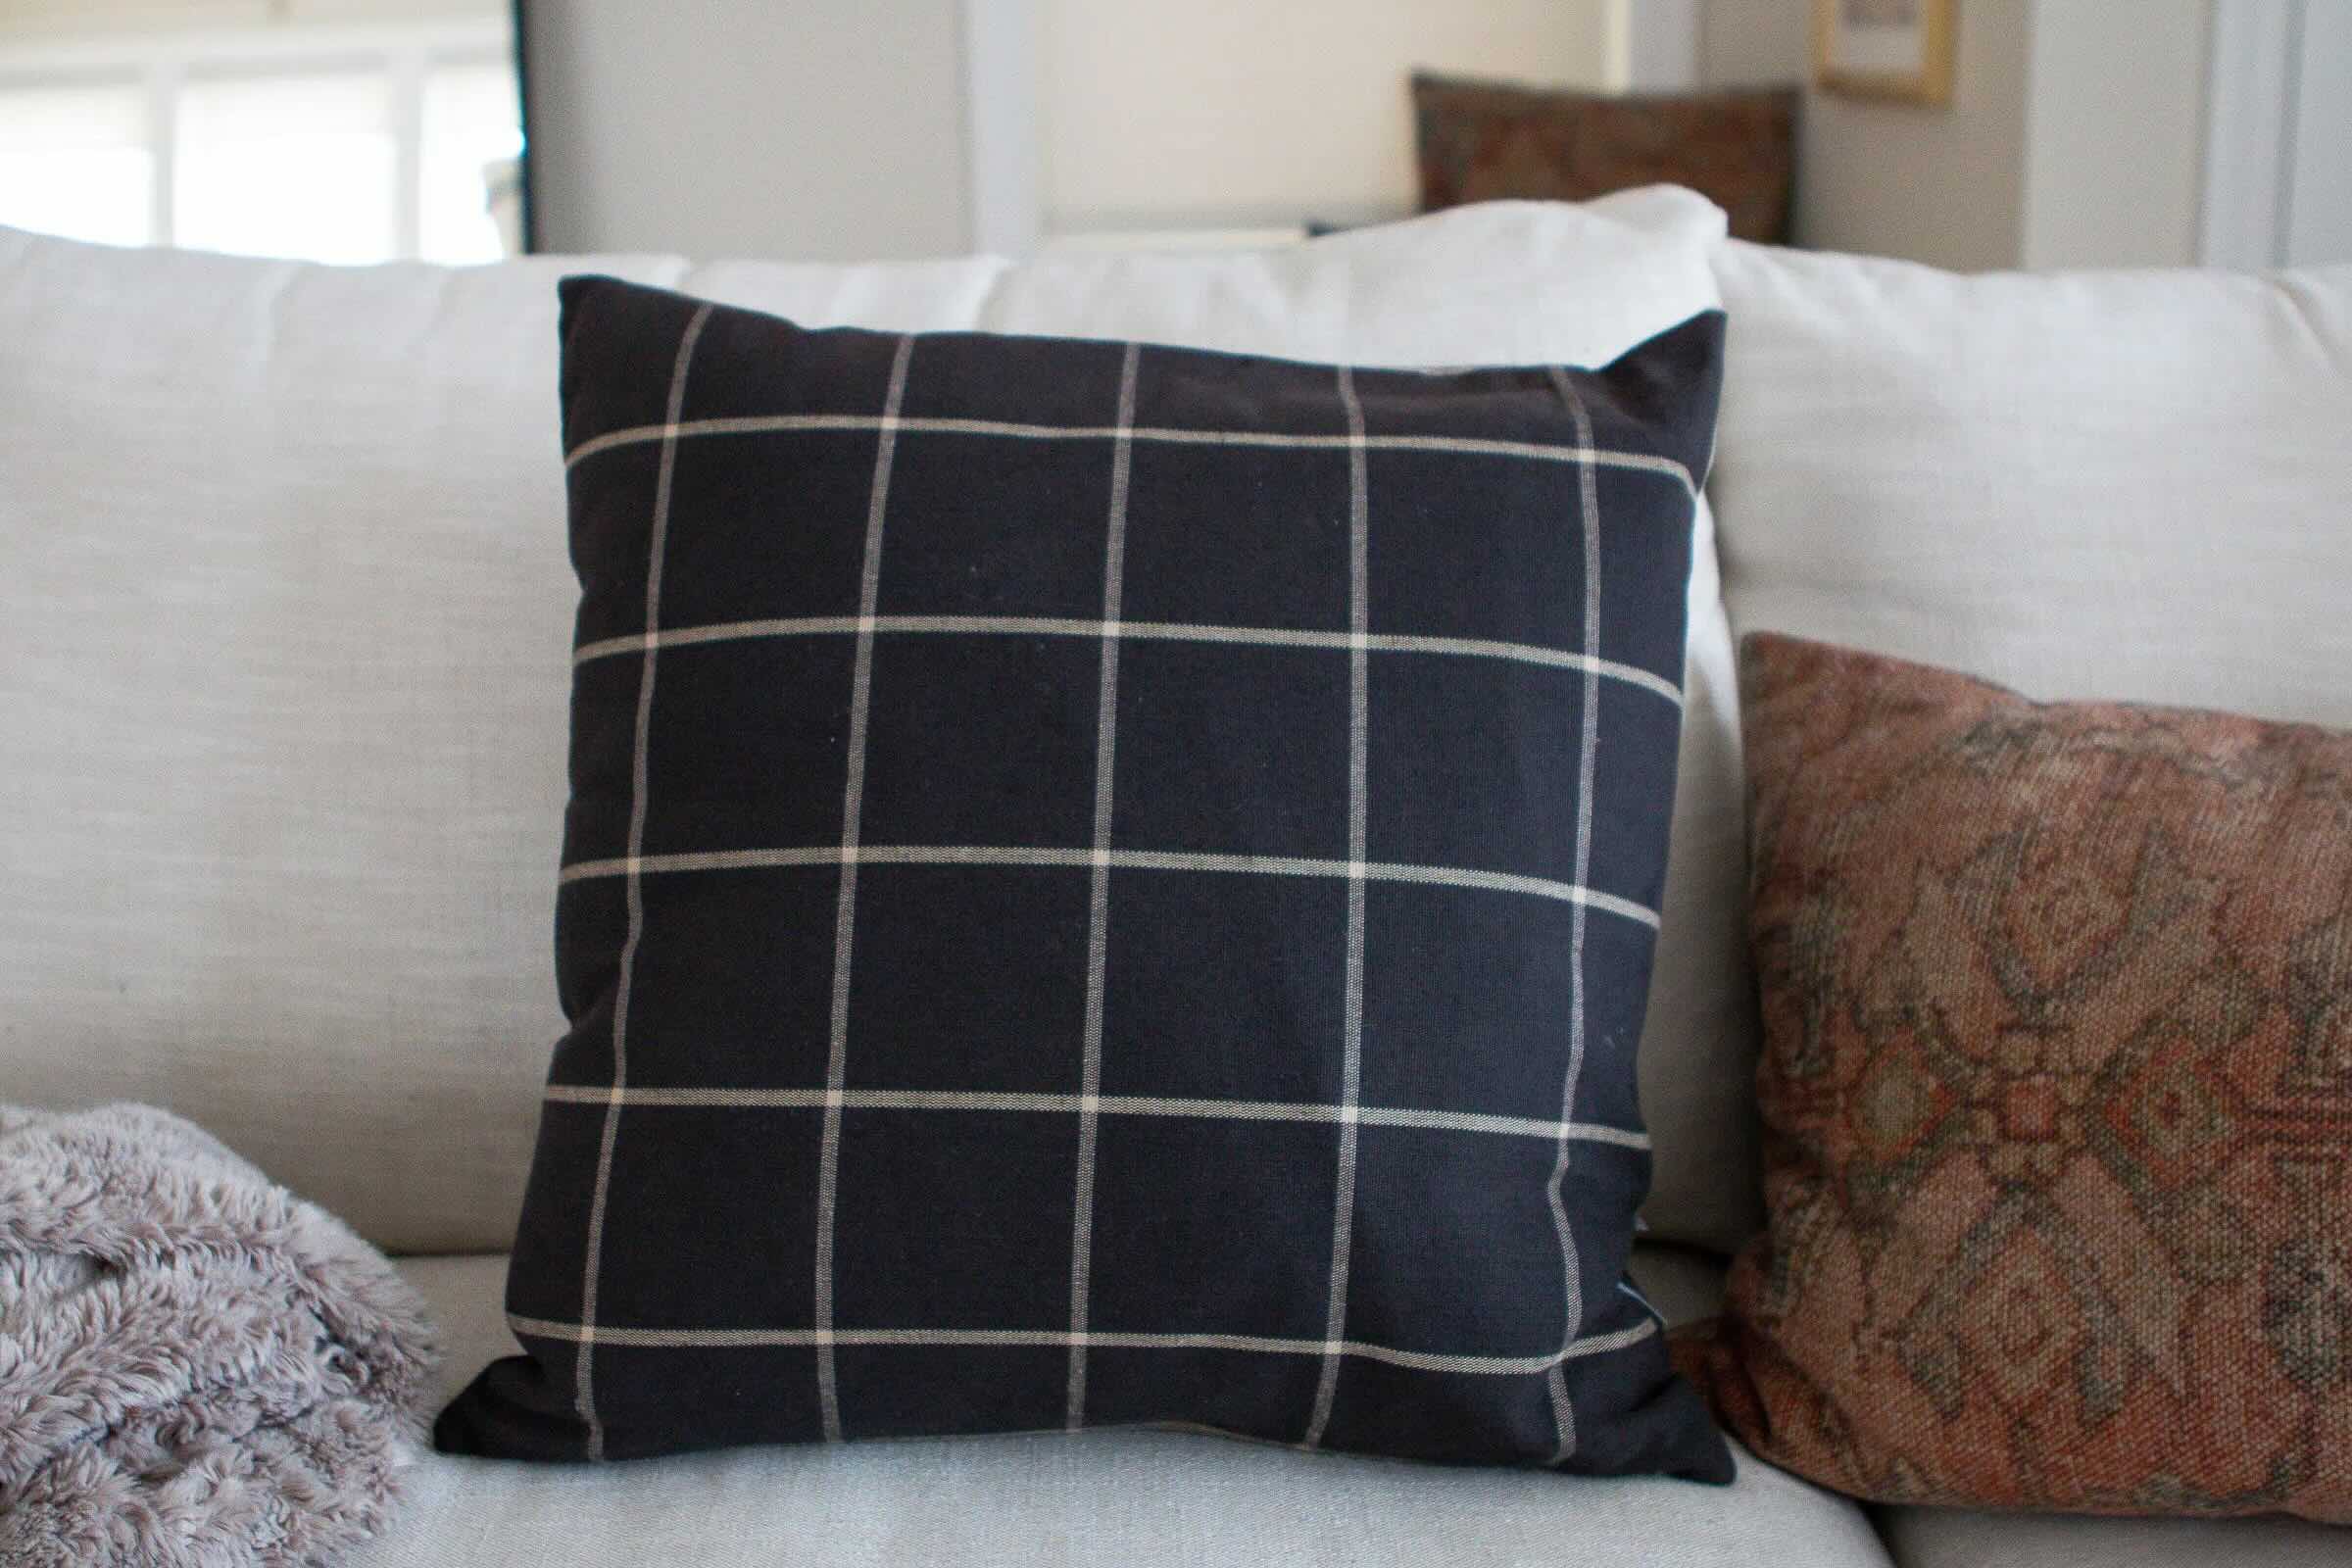 How To Use Throw Pillows